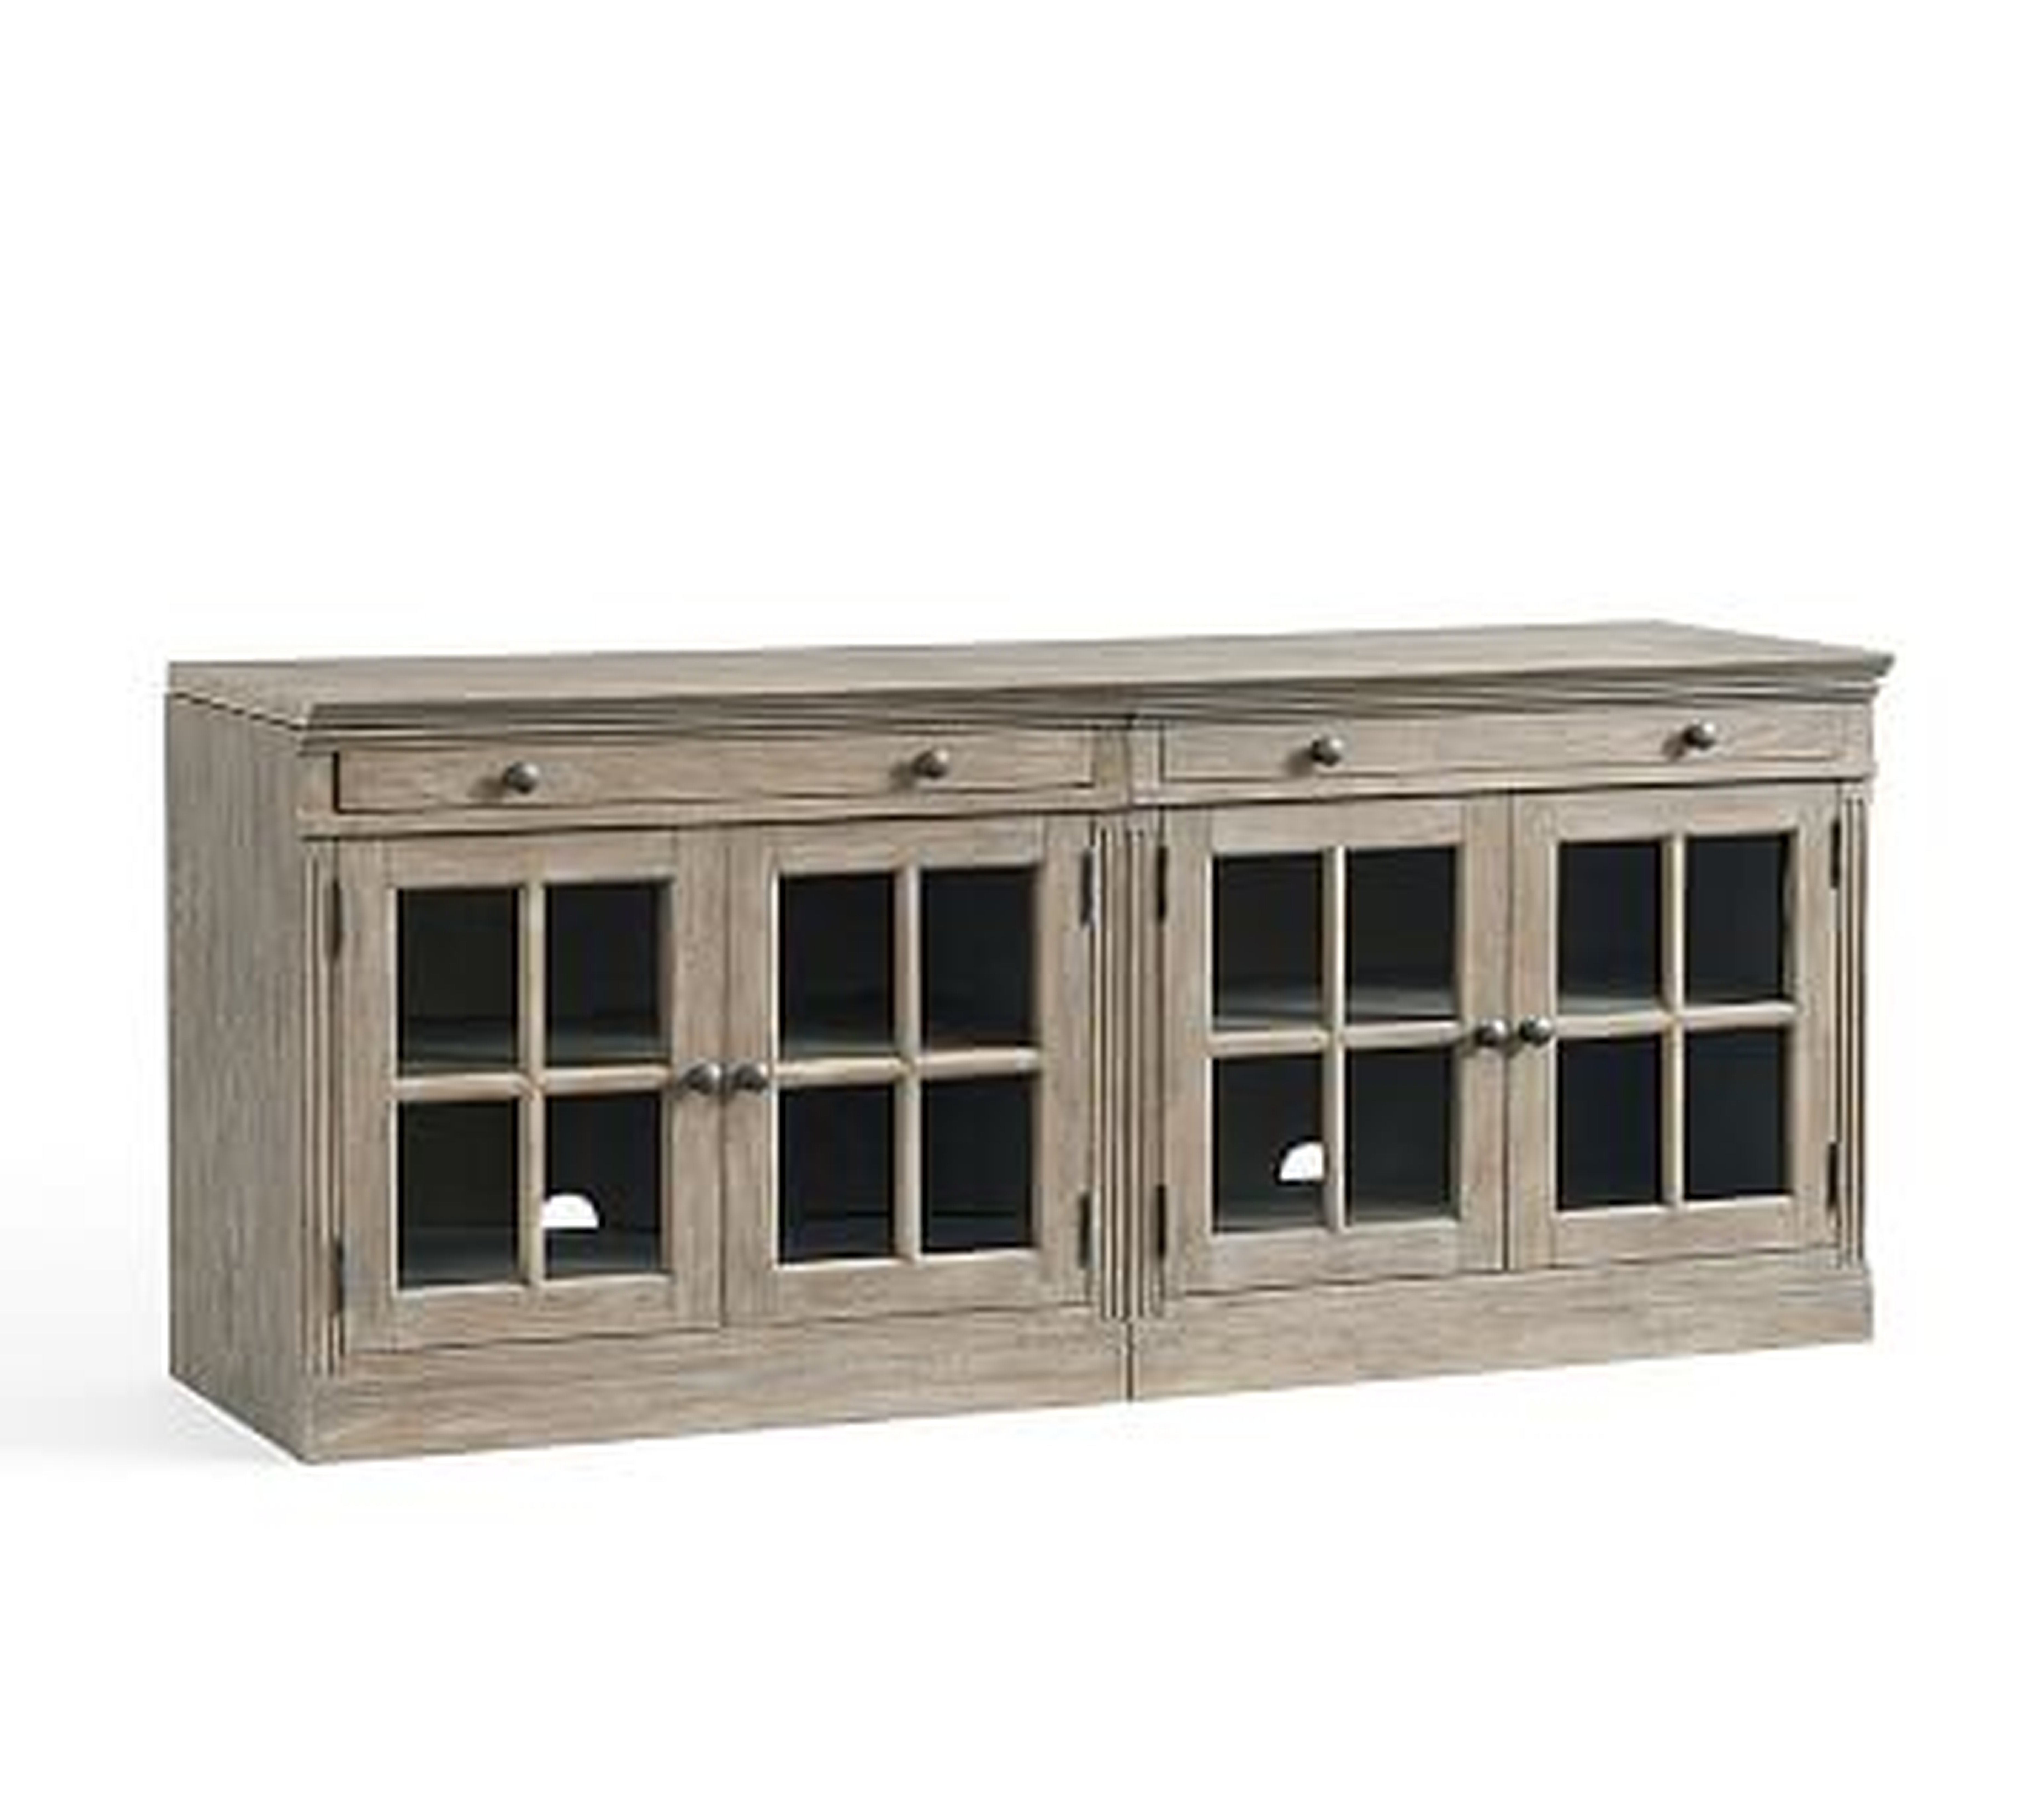 Livingston 70" Media Console with Glass Cabinets, Gray Wash - Pottery Barn